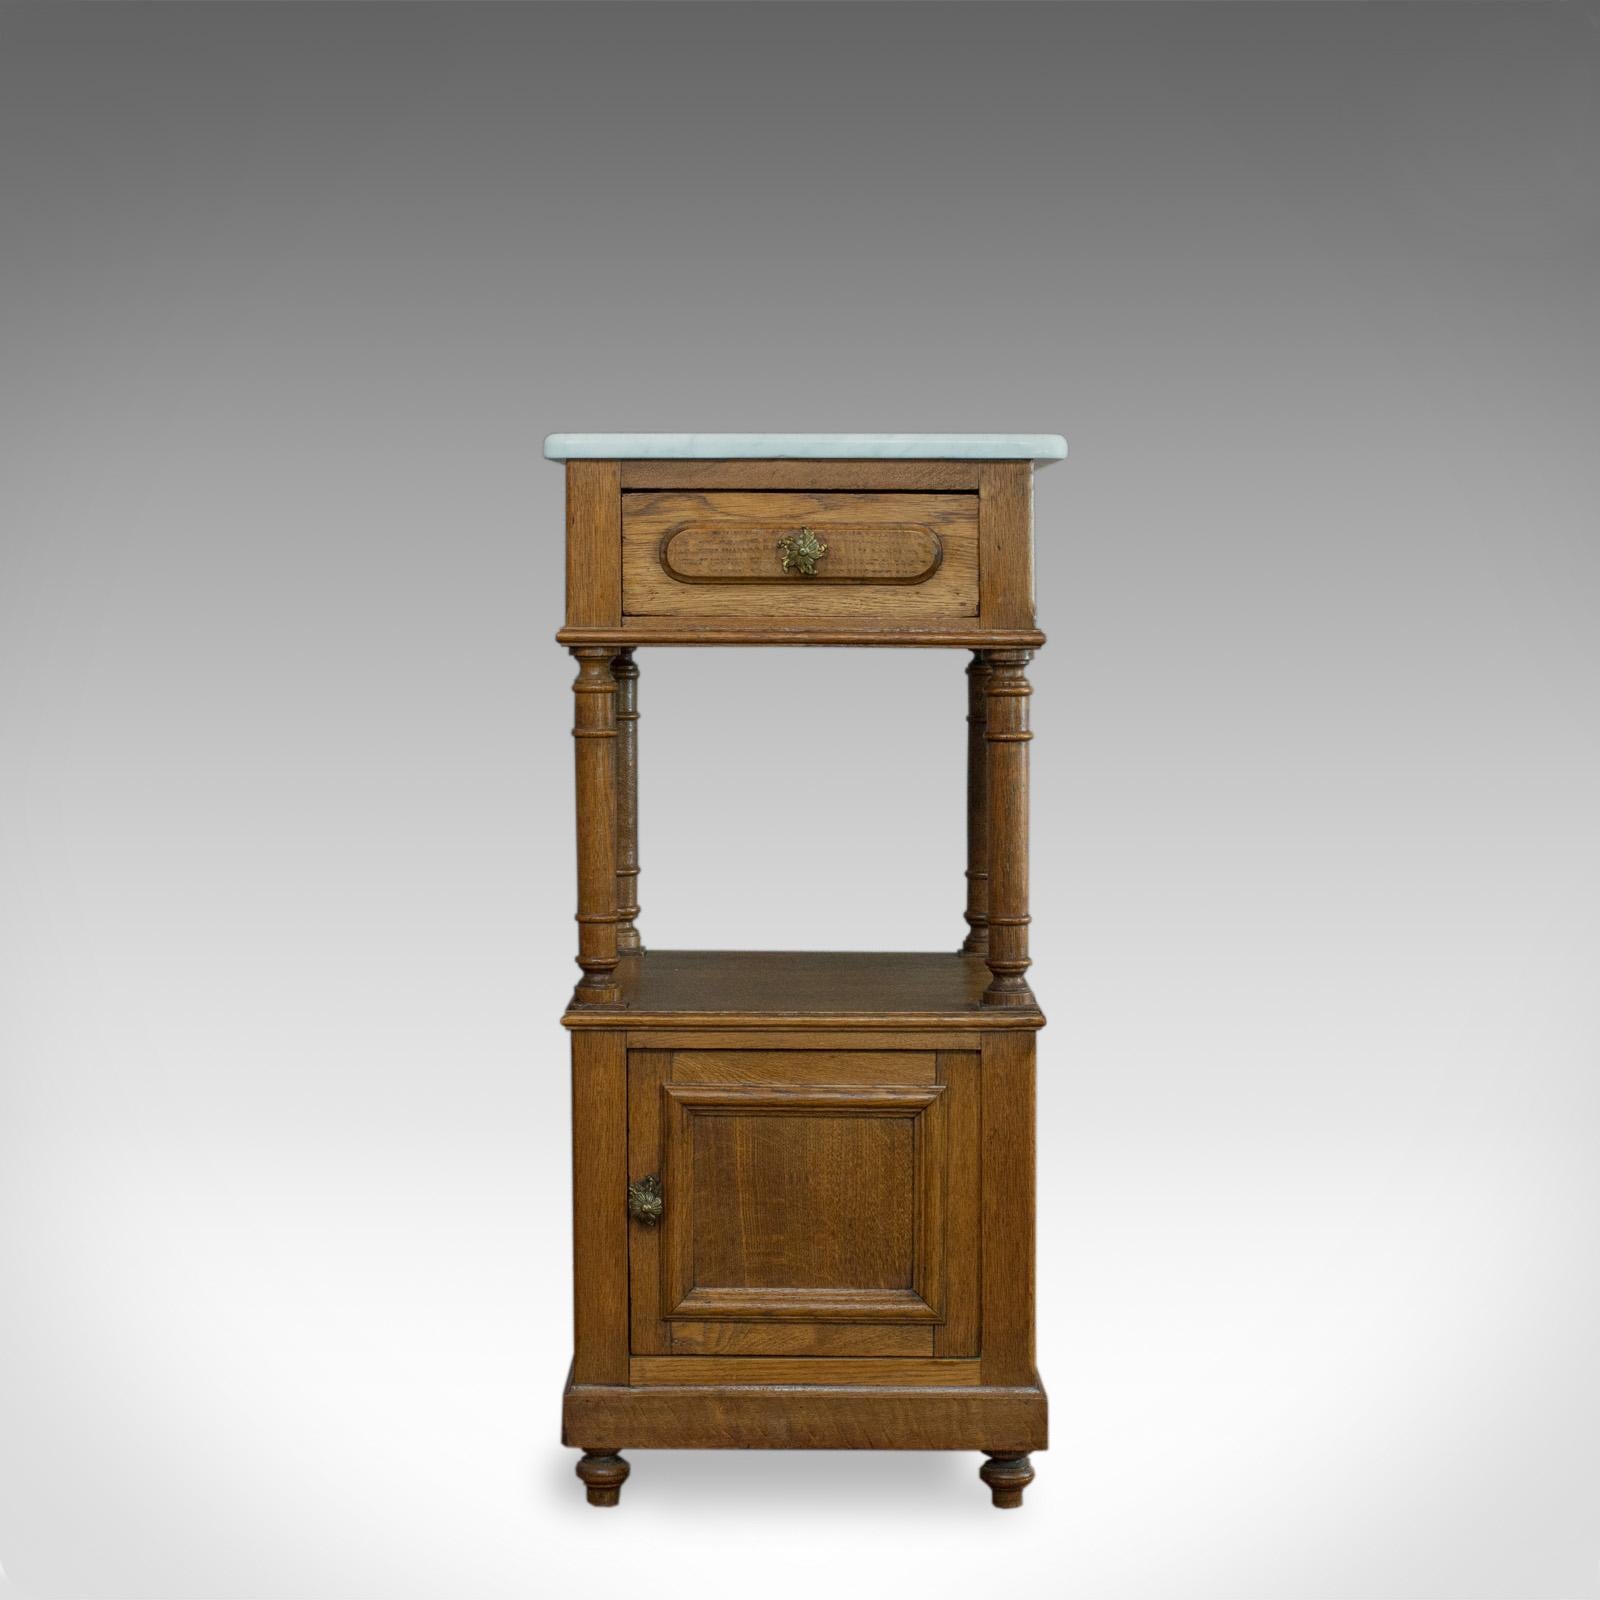 This is an antique bedside cabinet. A French, oak and marble, lamp nightstand table dating to the early 20th century, circa 1930.

Select oak with wisps of medullary rays and fine grain interest
Rich consistent whiskey hues and a desirable aged